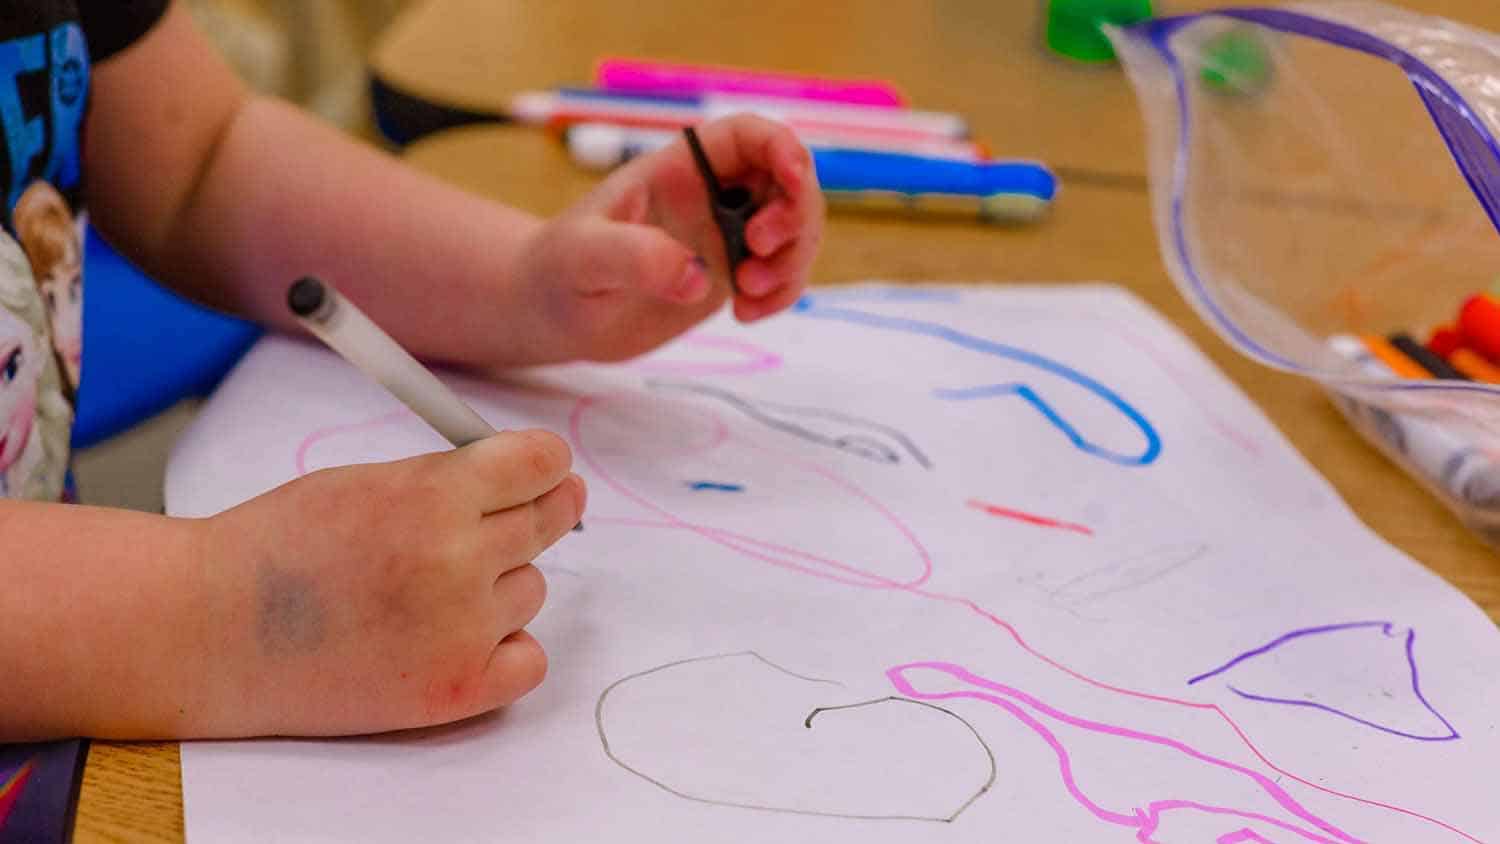 photo shows young child's hands coloring with magic markers